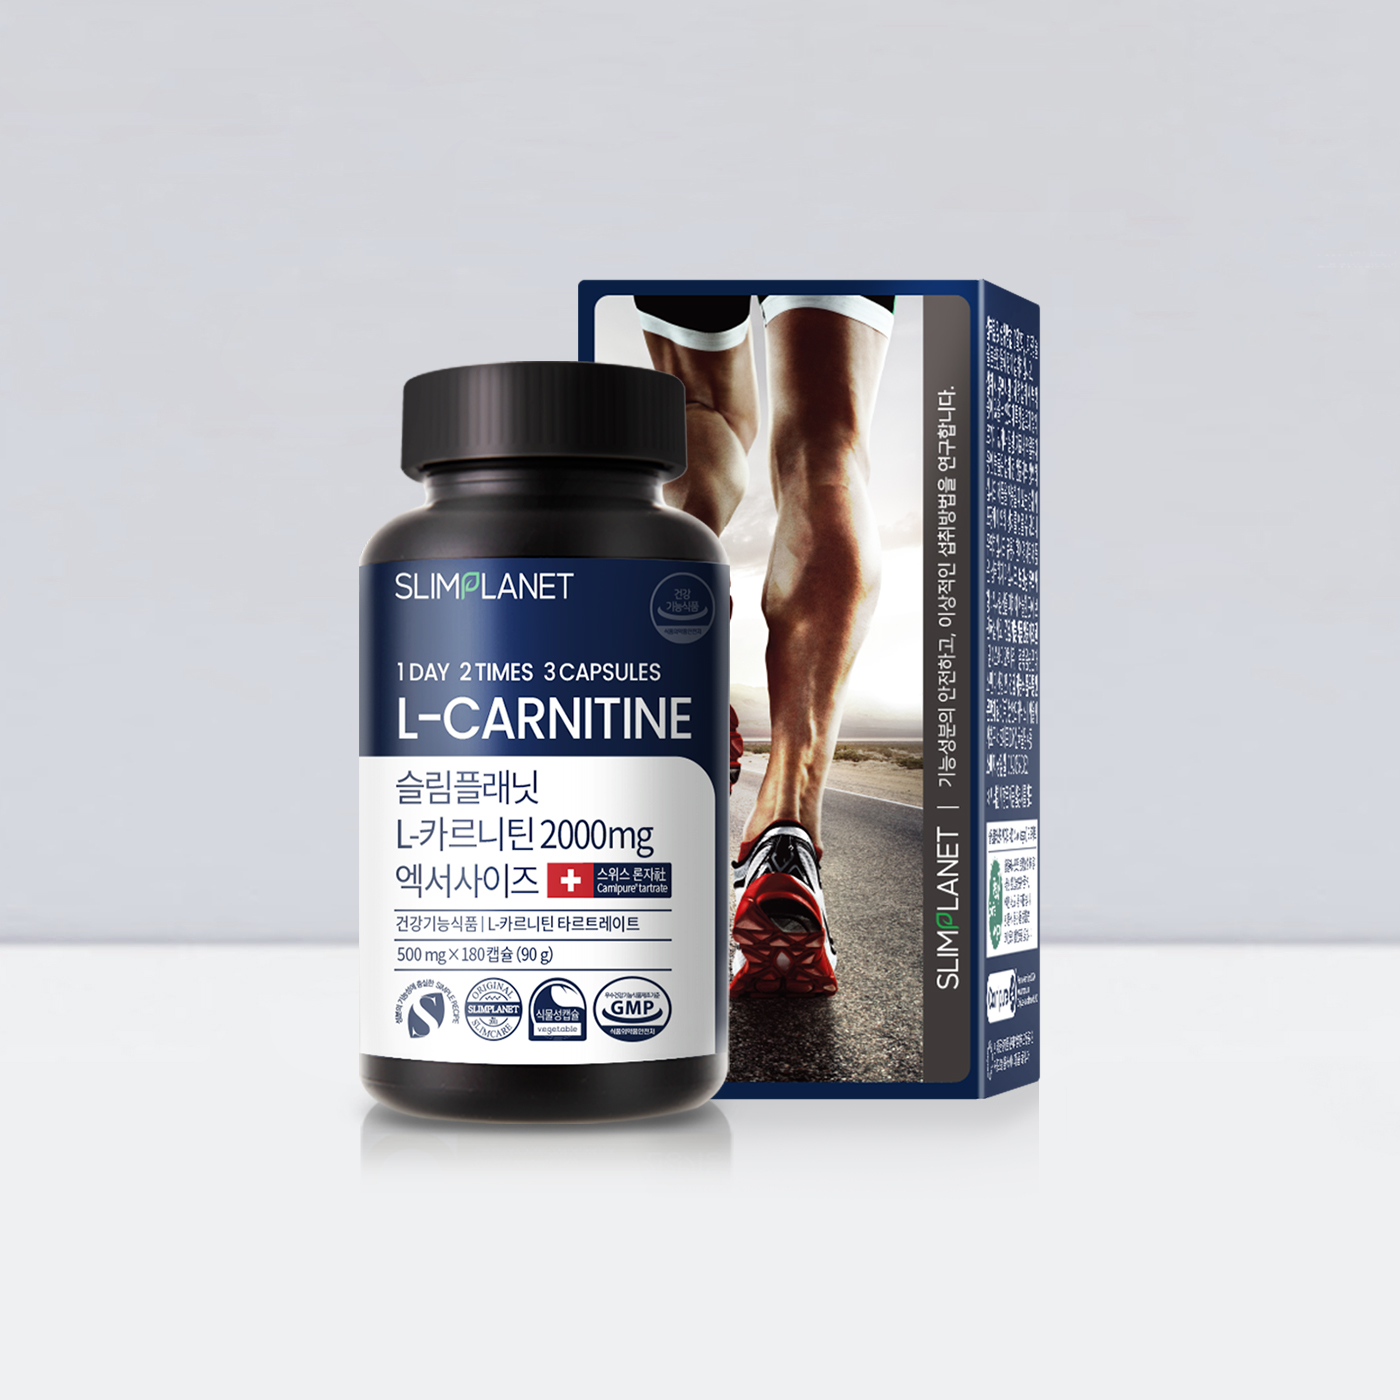 Slimplanet L-Canitine 2000mg Exercise (30 days)